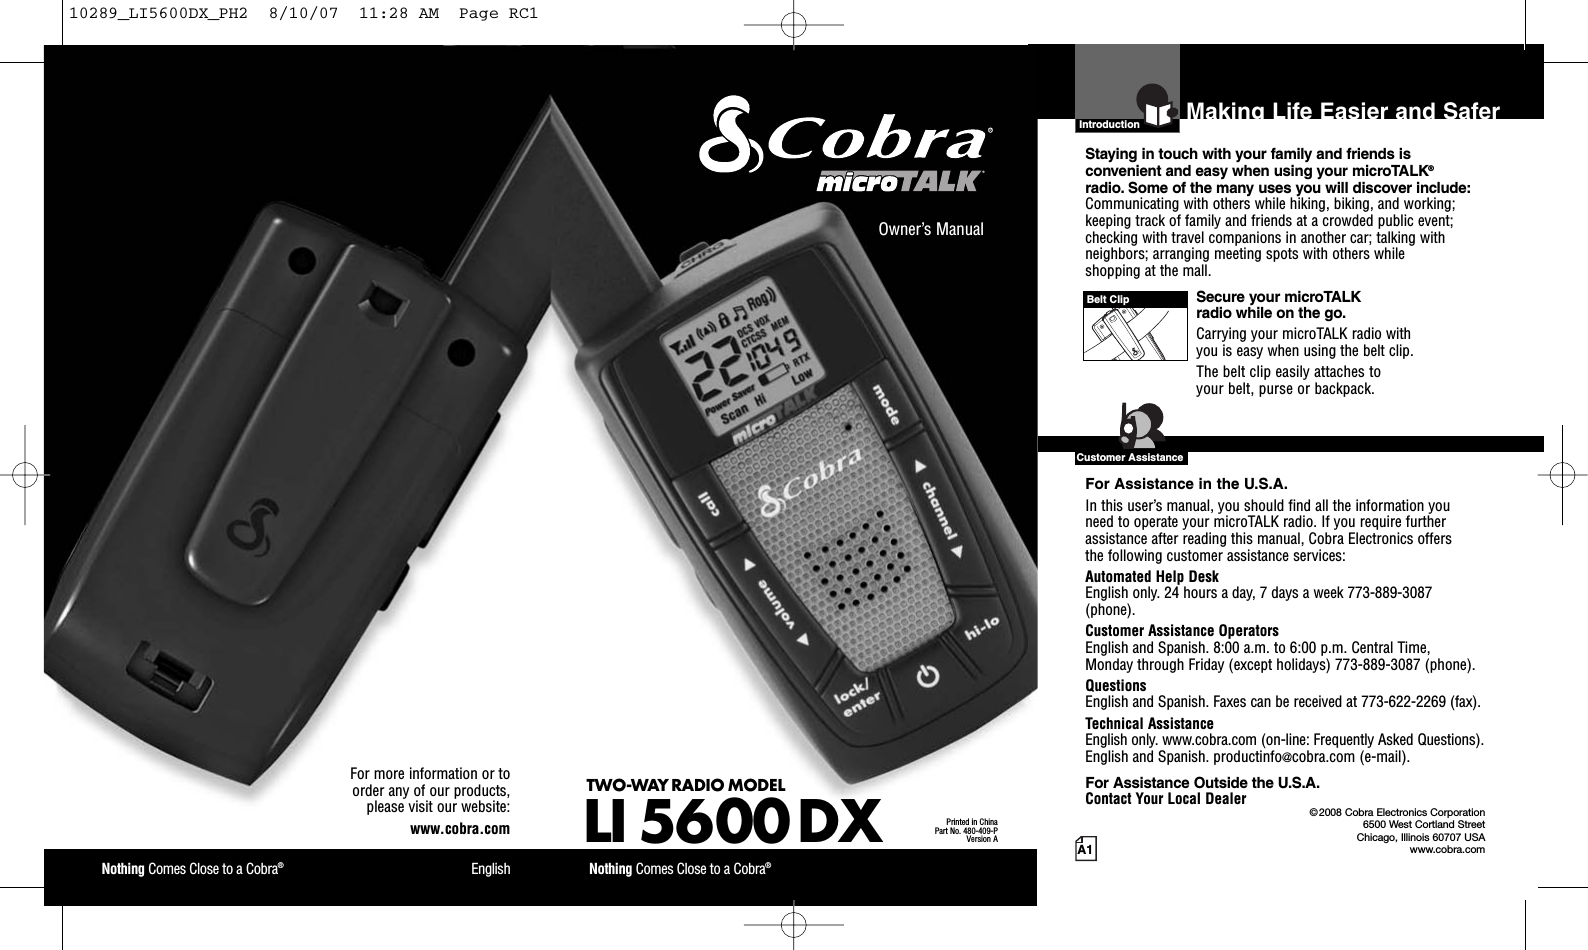 Nothing Comes Close to a Cobra®EnglishFor more information or to order any of our products, please visit our website:www.cobra.comA1Making Life Easier and SaferOwner’s ManualNothing Comes Close to a Cobra®TWO-WAY RADIO MODEL LI 5600 DXPrinted in ChinaPart No. 480-409-PVersion AIntro Operation CustomerAssistanceWarrantyNoticeMain IconsSecondary IconsIntroductionStaying in touch with your family and friends is convenient and easy when using your microTALK®radio. Some of the many uses you will discover include:Communicating with others while hiking, biking, and working;keeping track of family and friends at a crowded public event;checking with travel companions in another car; talking withneighbors; arranging meeting spots with others while shopping at the mall.Secure your microTALK radio while on the go.Carrying your microTALK radio with you is easy when using the belt clip. The belt clip easily attaches to your belt, purse or backpack.For Assistance in the U.S.A.In this user’s manual, you should find all the information you need to operate your microTALK radio. If you require furtherassistance after reading this manual, Cobra Electronics offers the following customer assistance services:Automated Help Desk English only. 24 hours a day, 7 days a week 773-889-3087(phone). Customer Assistance OperatorsEnglish and Spanish. 8:00 a.m. to 6:00 p.m. Central Time, Monday through Friday (except holidays) 773-889-3087 (phone). QuestionsEnglish and Spanish. Faxes can be received at 773-622-2269 (fax). Technical AssistanceEnglish only. www.cobra.com (on-line: Frequently Asked Questions). English and Spanish. productinfo@cobra.com (e-mail).For Assistance Outside the U.S.A.Contact Your Local DealerIntro Operation CustomerAssistanceWarrantyNoticeMain IconsSecondary Icons©2008 Cobra Electronics Corporation6500 West Cortland StreetChicago, Illinois 60707 USAwww.cobra.comCustomer AssistanceBelt Clip10289_LI5600DX_PH2  8/10/07  11:28 AM  Page RC1